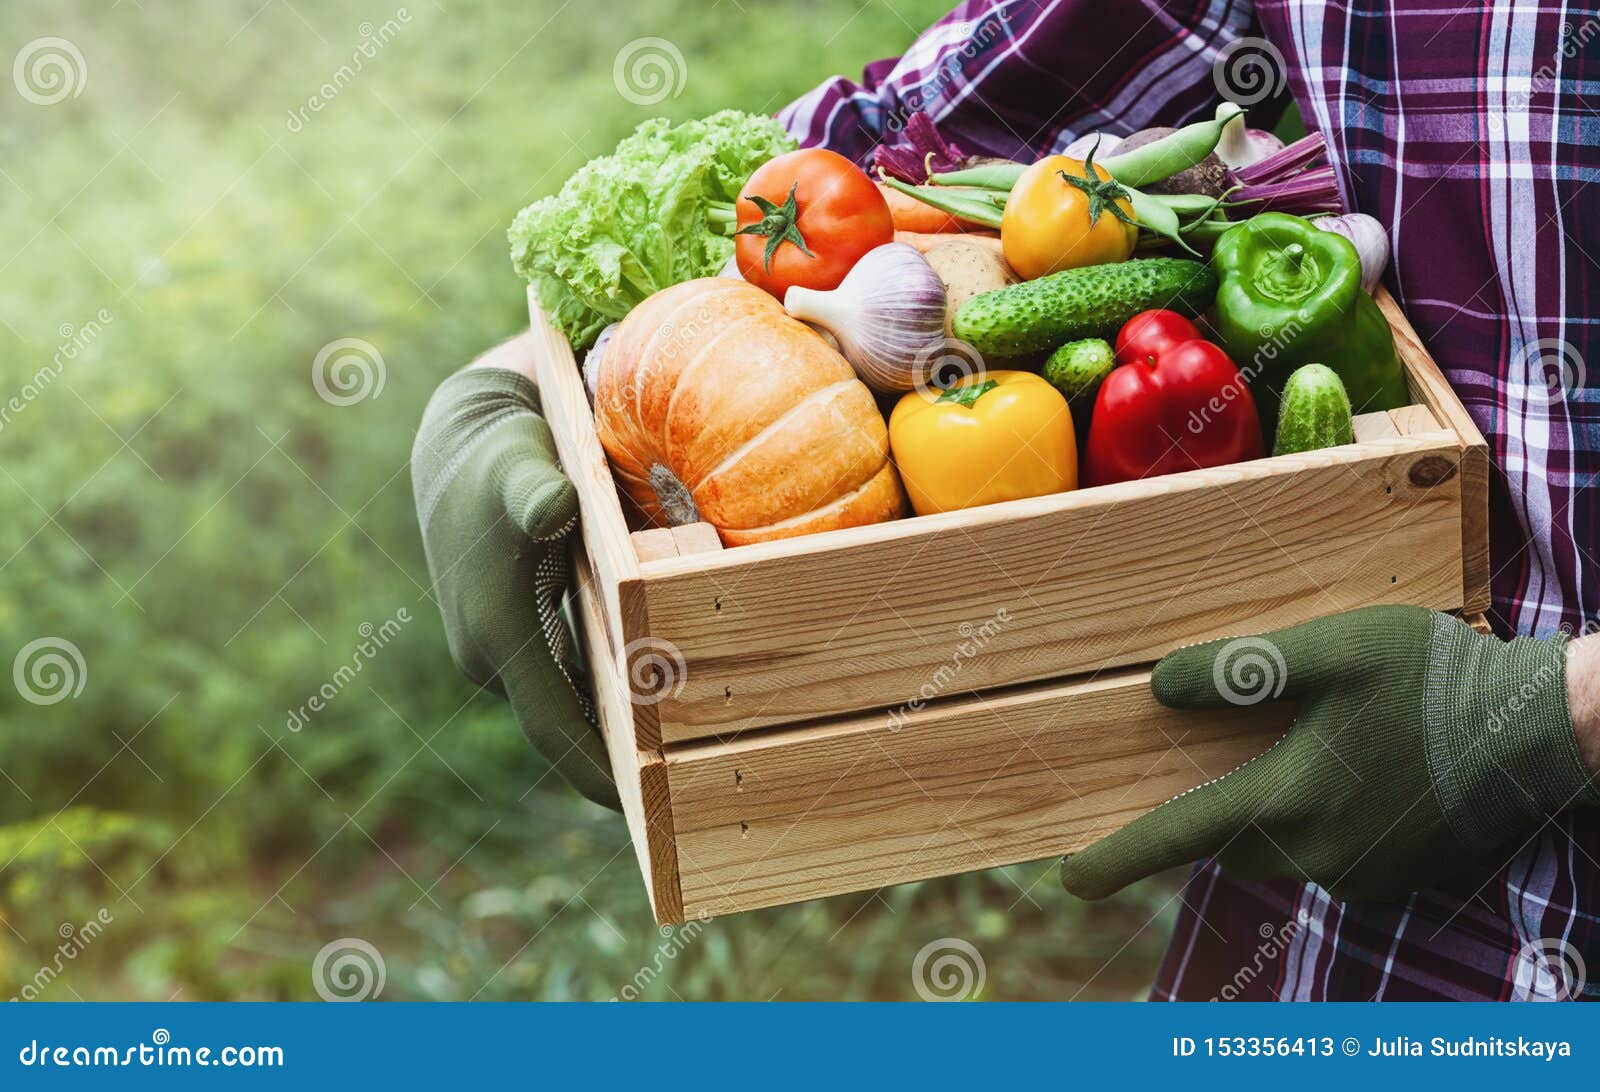 farmer holds in his hands a wooden box with a vegetables produce on the background of the garden. fresh and organic food